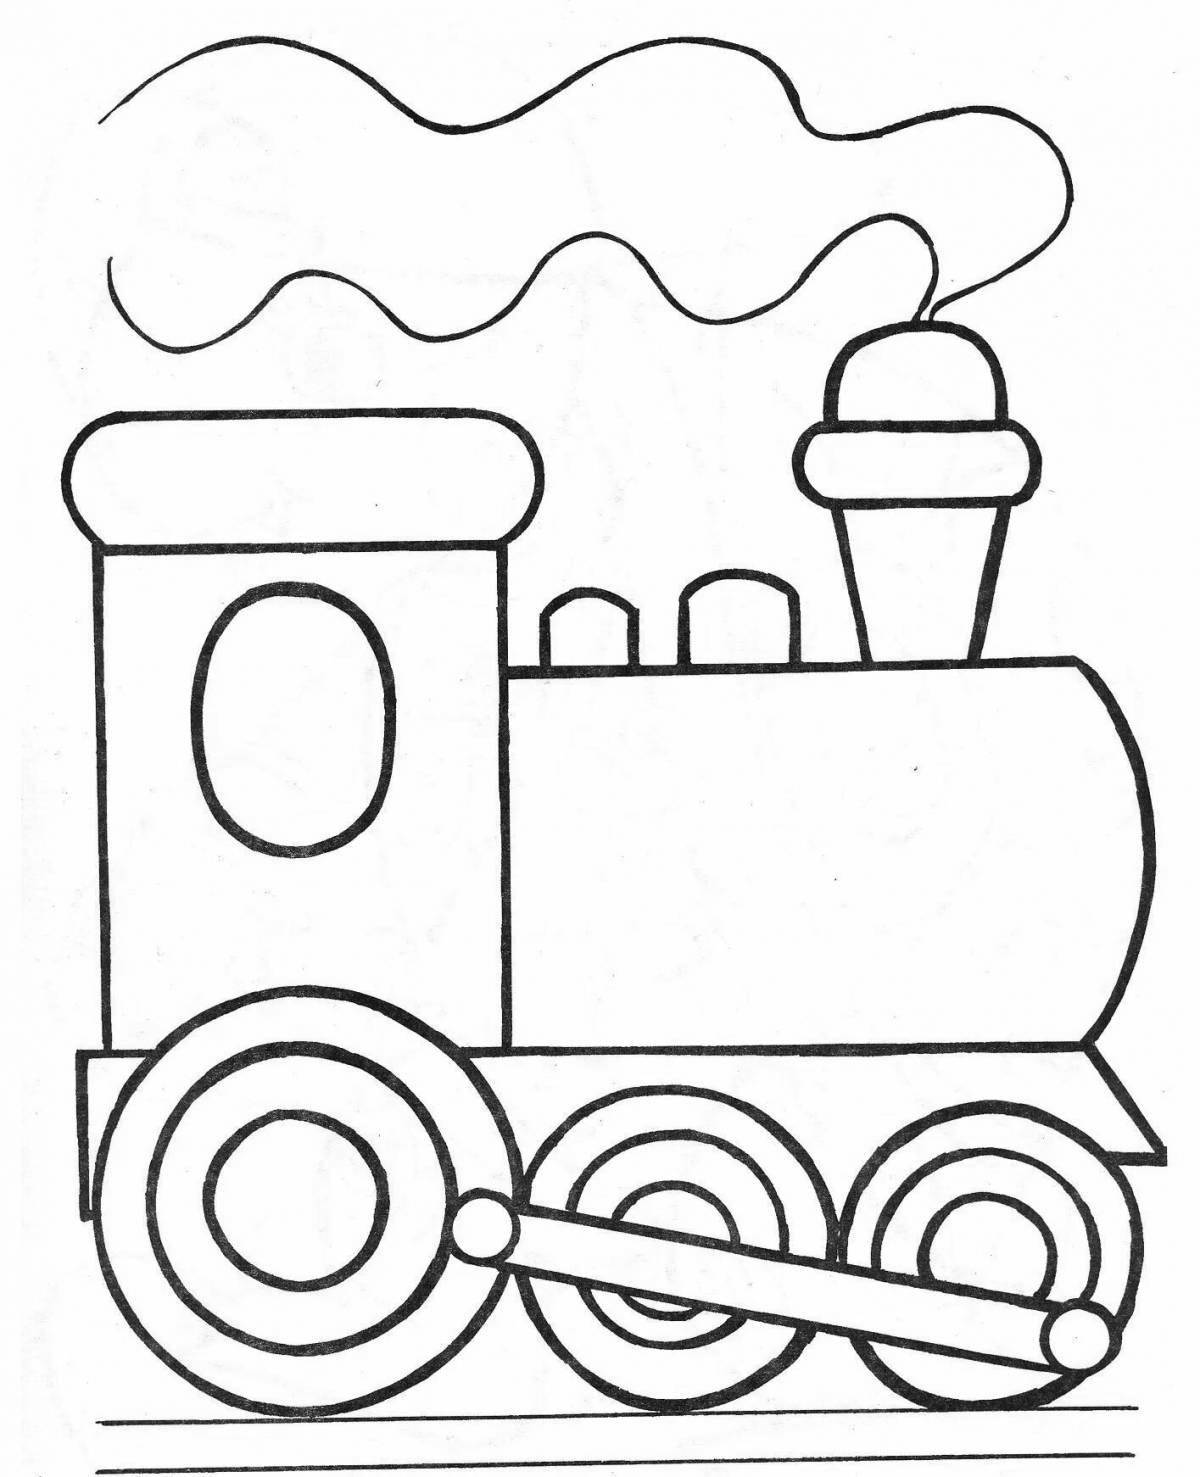 Children's coloring of the train in bright colors